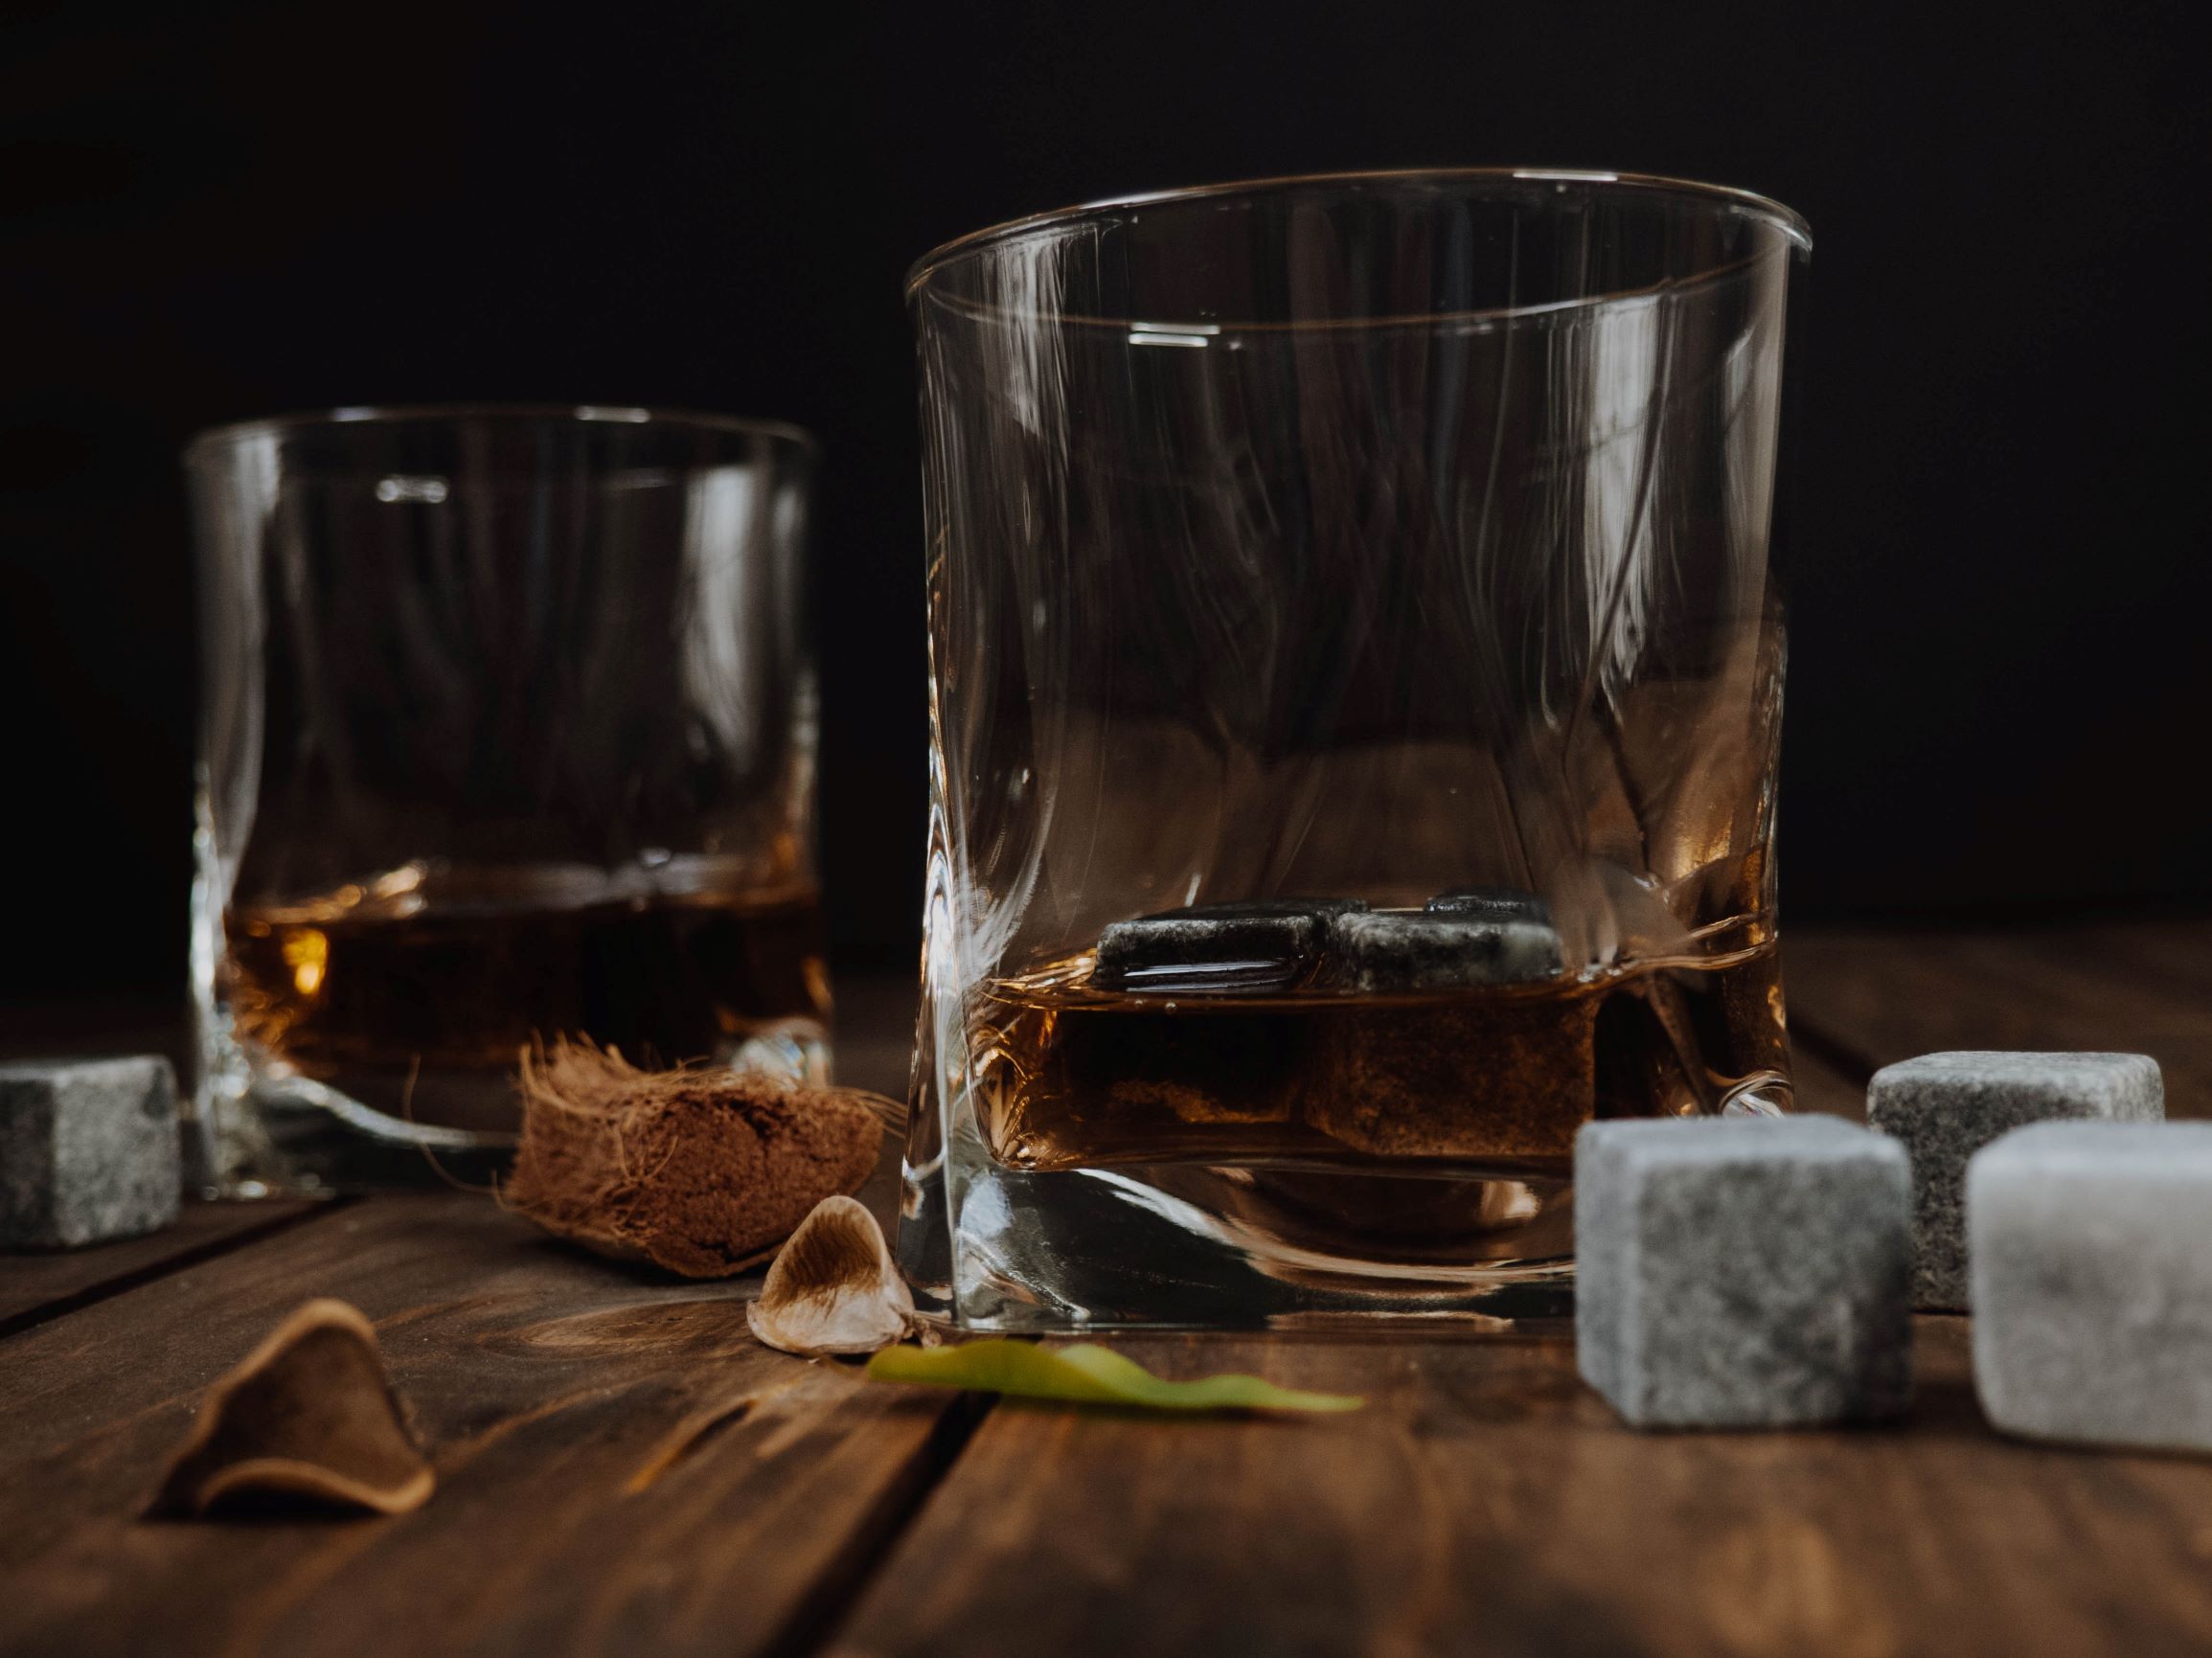 Two whiskey glasses on a wooden table with various aromatics and a dark background